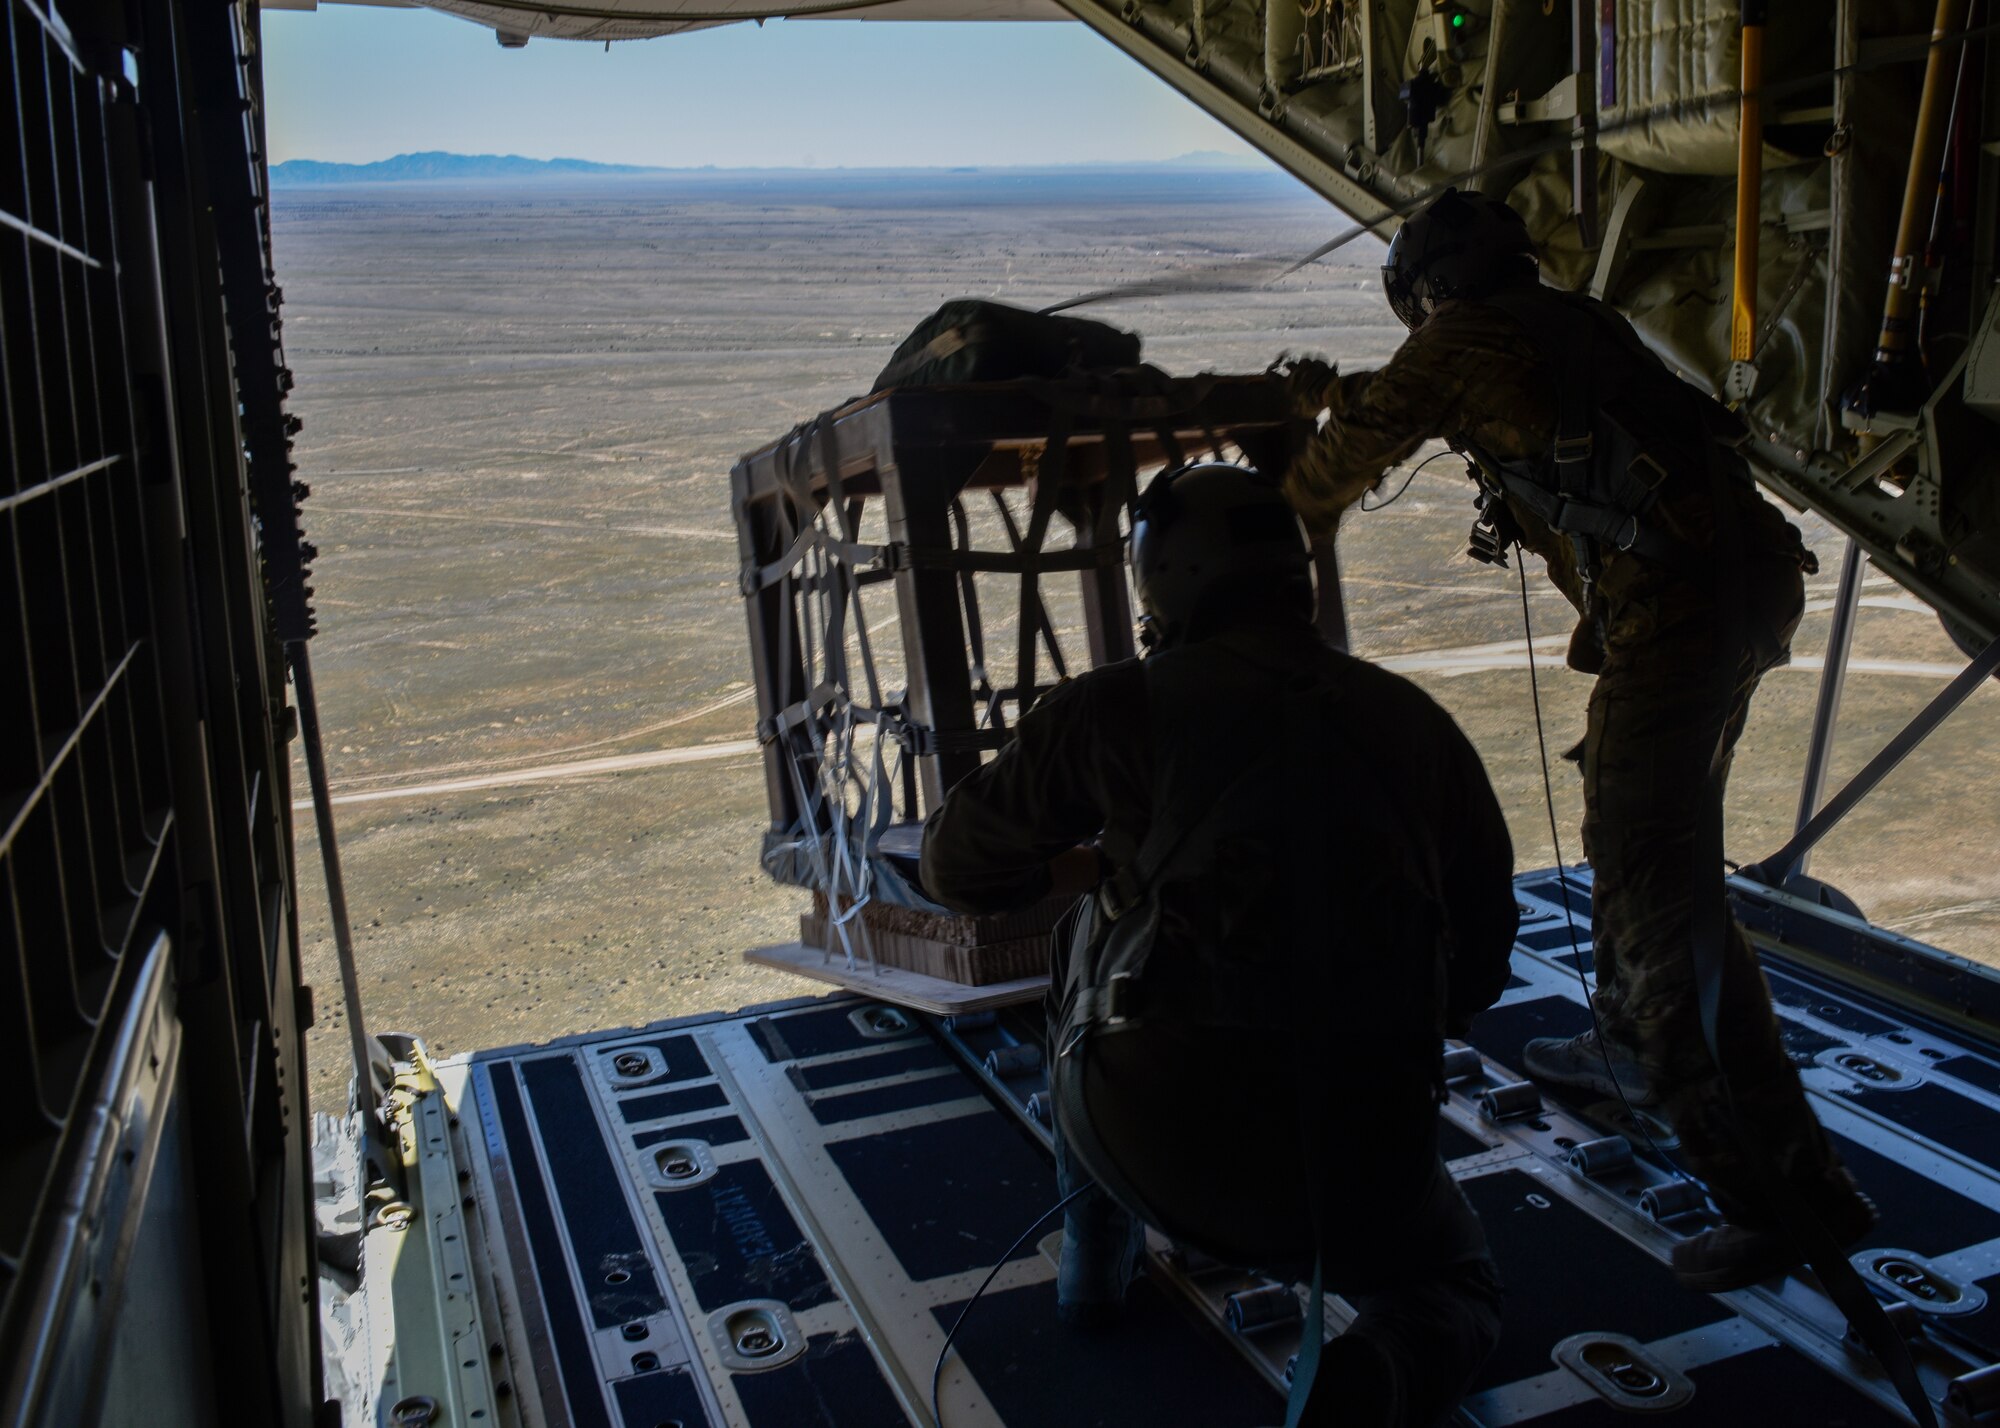 U.S. Air Force loadmasters with the 415th Special Operations Squadron conduct an airdrop at Kirtland Air Force Base, N.M. April 19, 2019. The 415th SOS mission is to train special operations aircrew members for the MC-130J Commando II and HC-130J Combat King II. (U.S. Air Force photo by Airman 1st Class Austin J. Prisbrey)